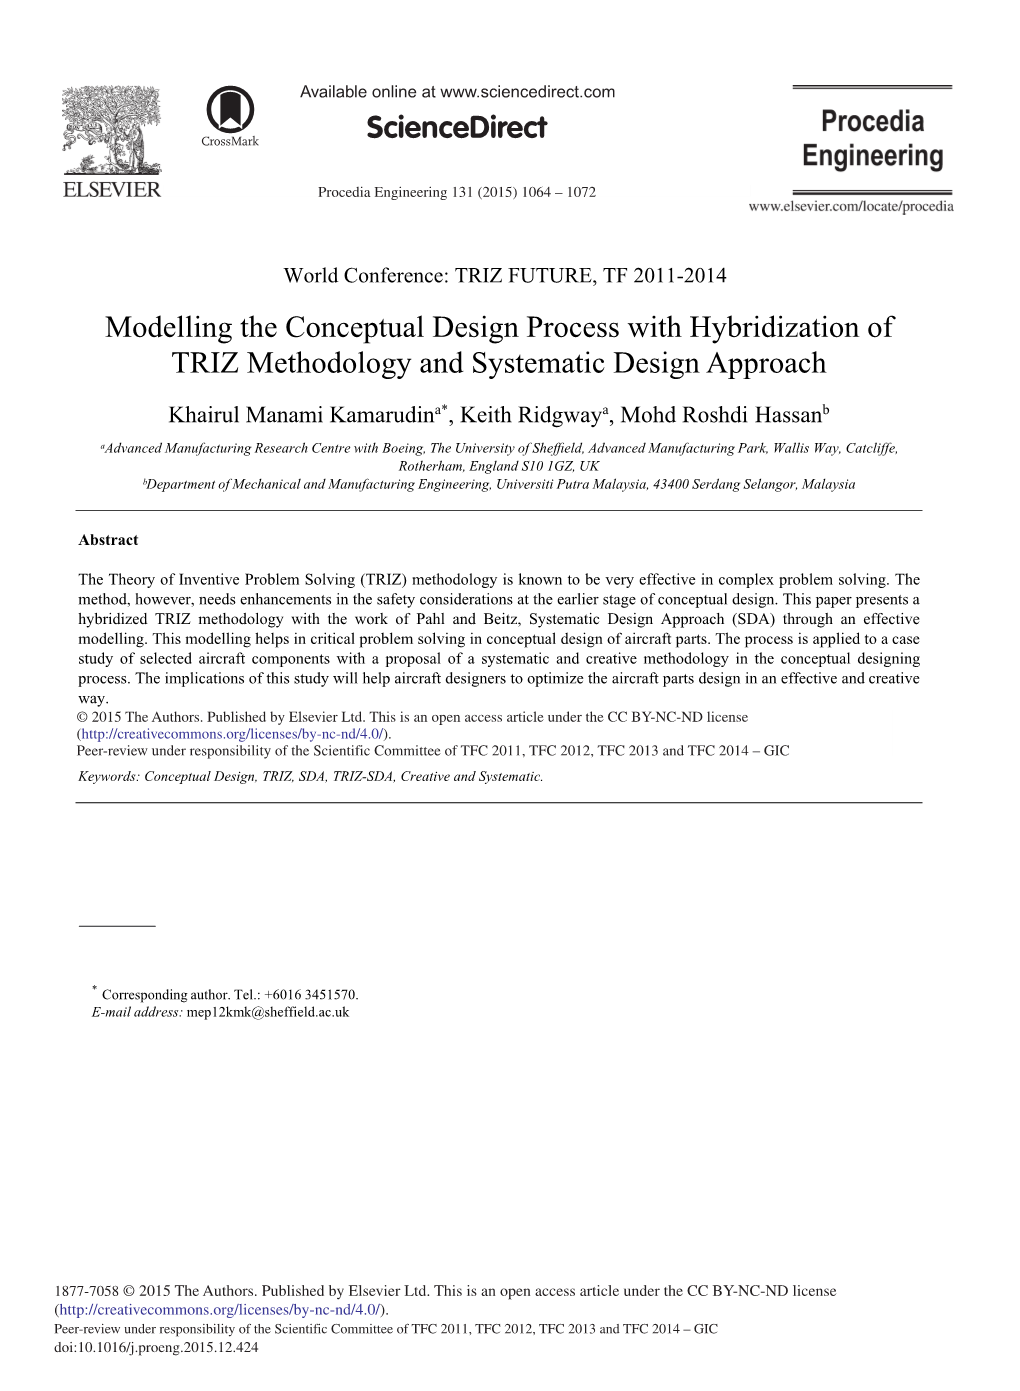 Modelling the Conceptual Design Process with Hybridization of TRIZ Methodology and Systematic Design Approach